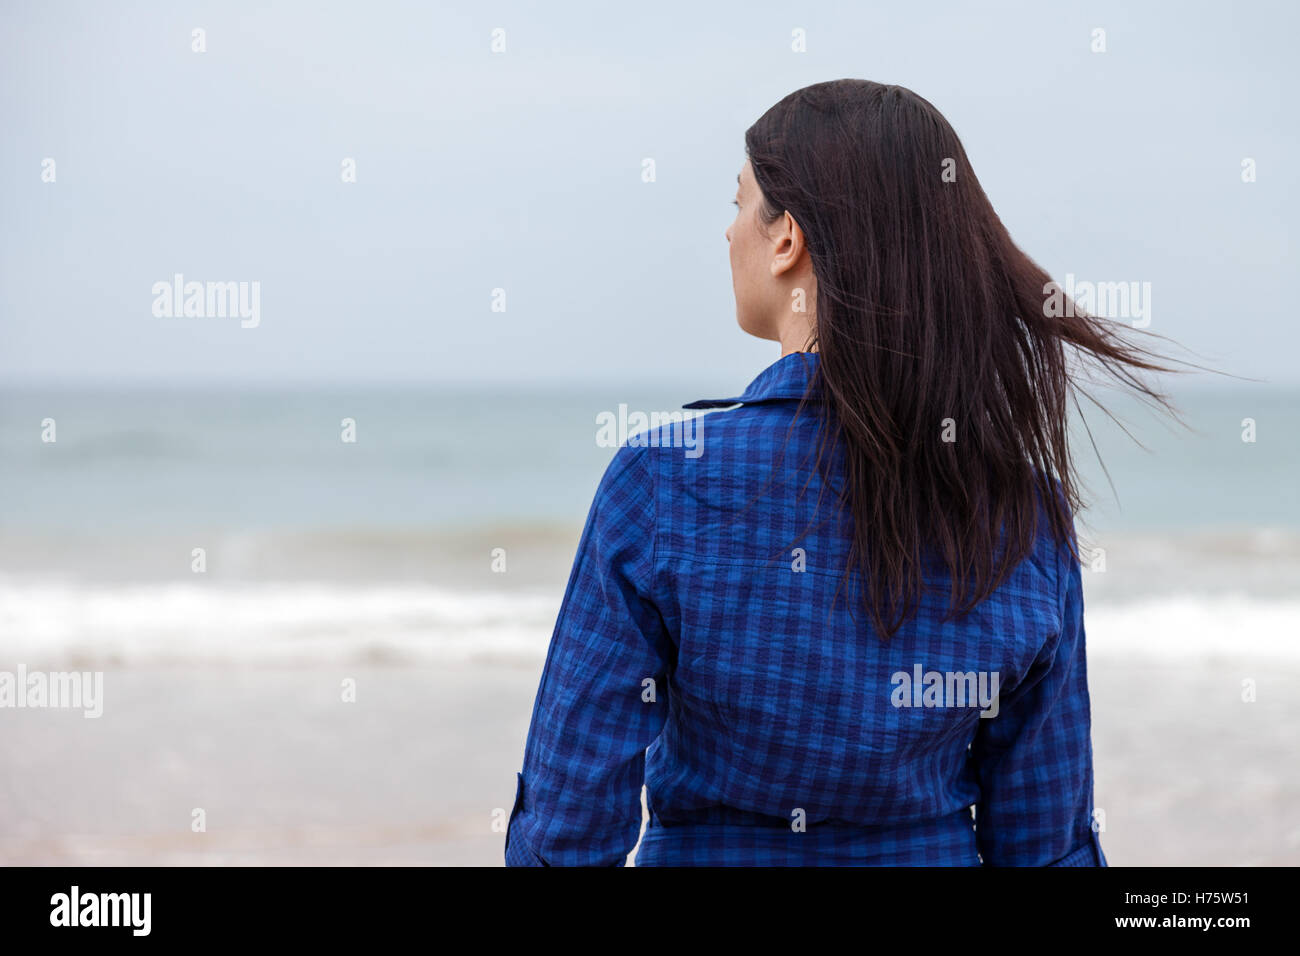 Lonely and depressed woman standing in front of the sea in a deserted beach on an Autumn day. Stock Photo